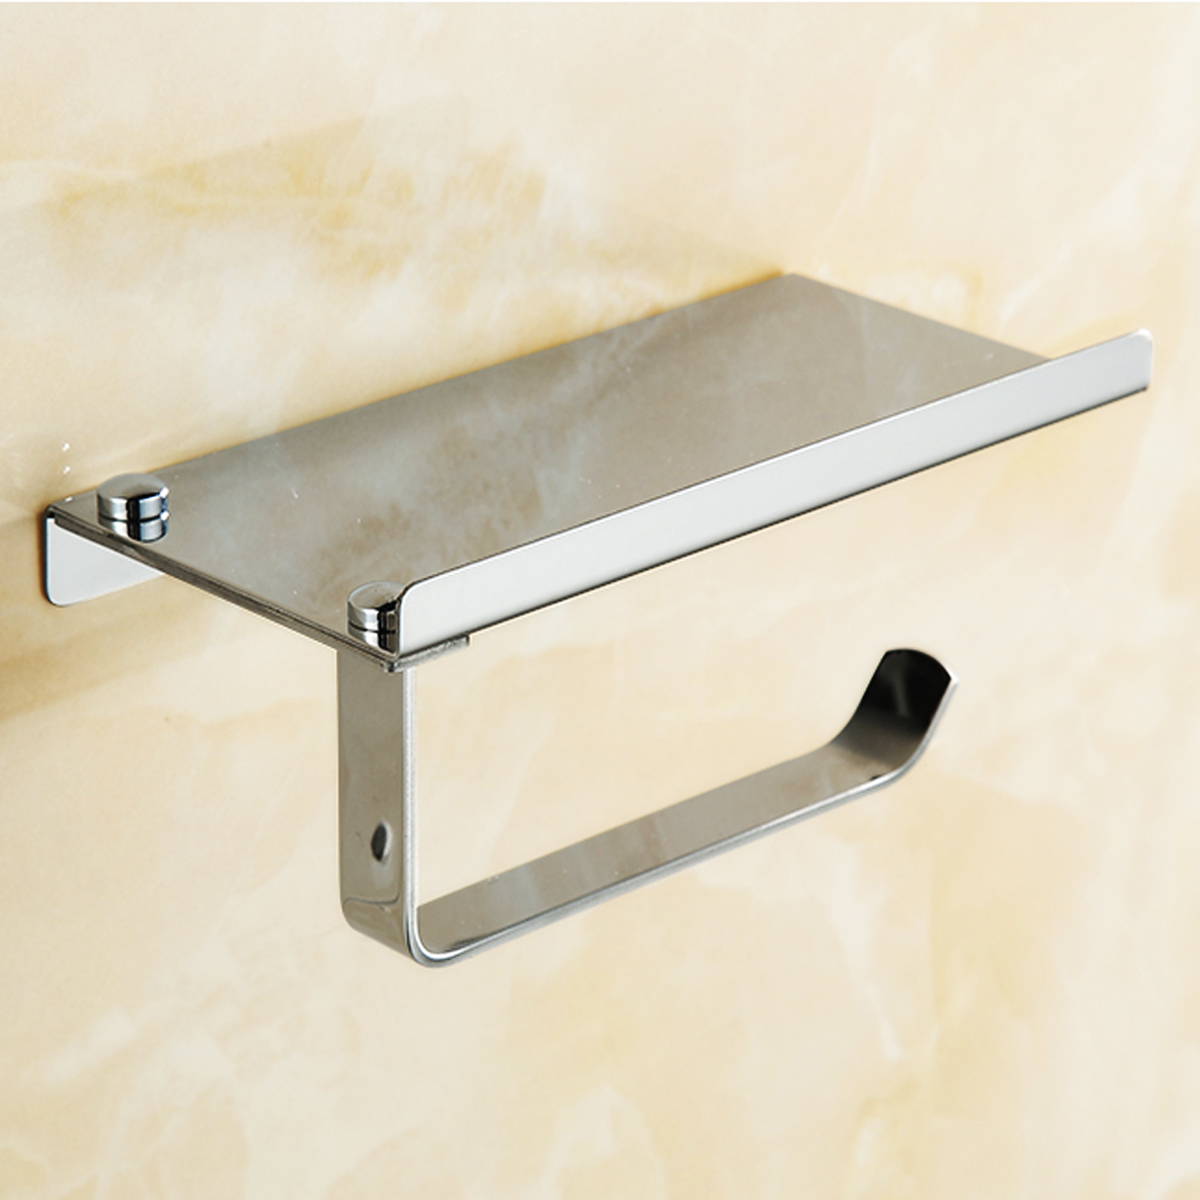 Stainless-Steel-Toilet-Roll-Tissue-Stand-Paper-Holder-Wall-Mounted-for-Home-Bathroom-Paper-Hook-1256427